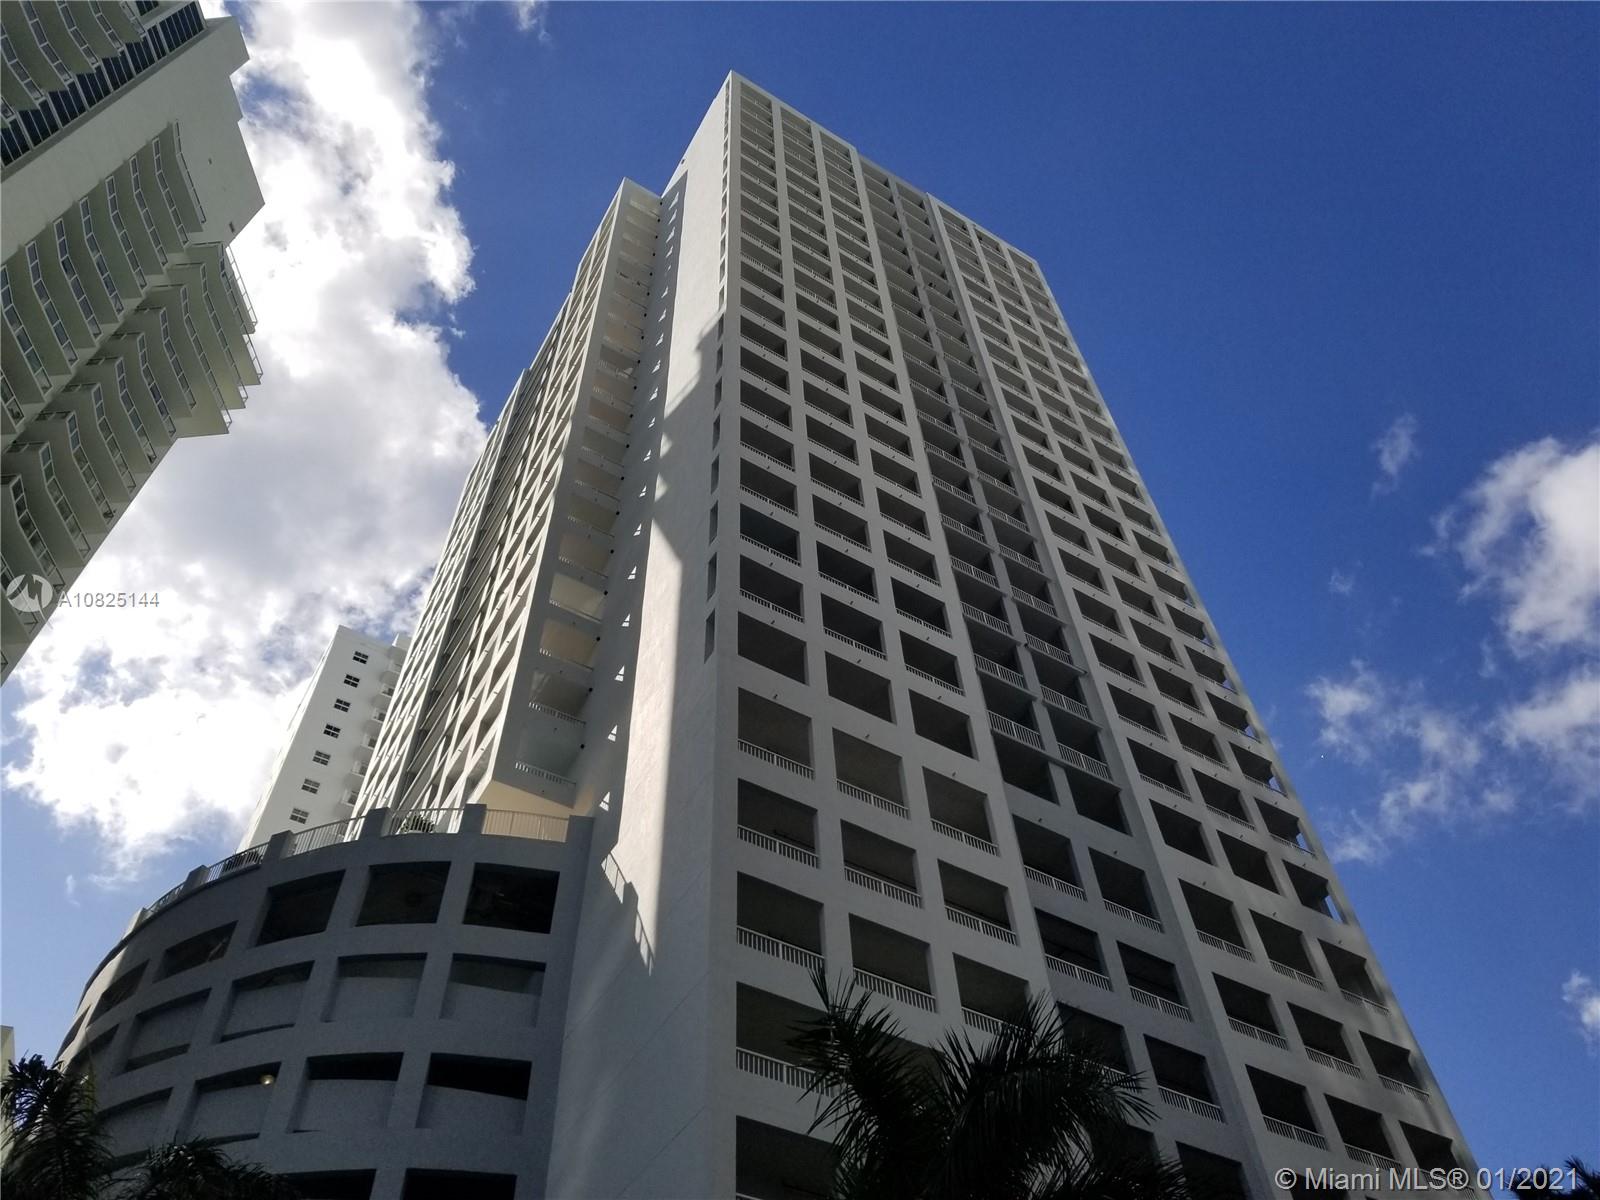 170 SE 14th St 1507, Miami, Florida 33131, 1 Bedroom Bedrooms, ,1 BathroomBathrooms,Residential,For Sale,170 SE 14th St 1507,A10825144